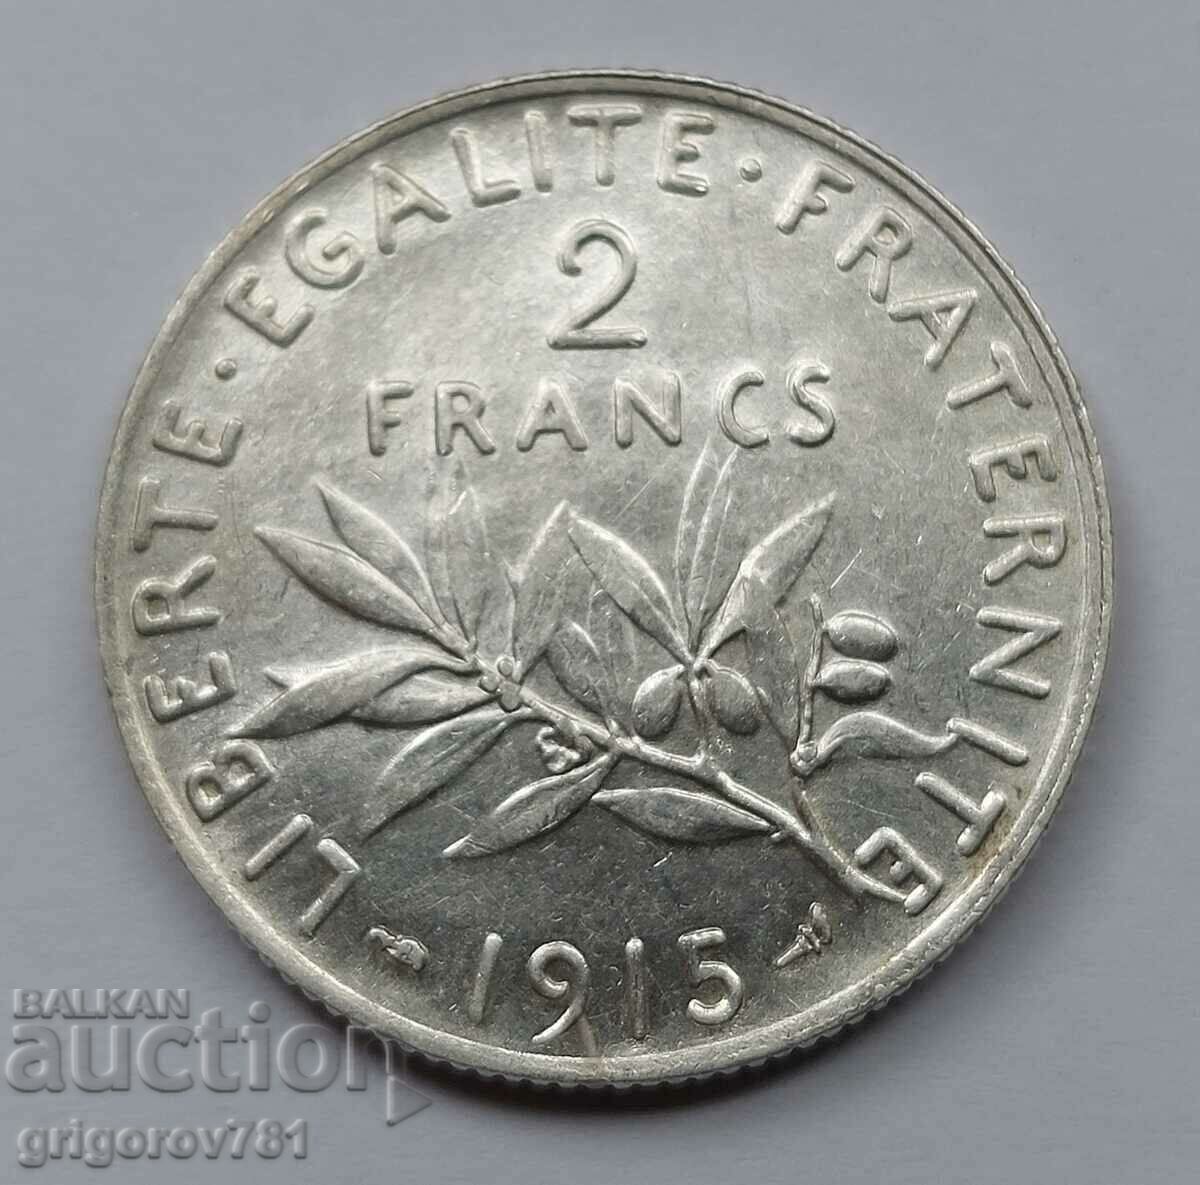 2 Francs Silver France 1915 - Silver Coin #116